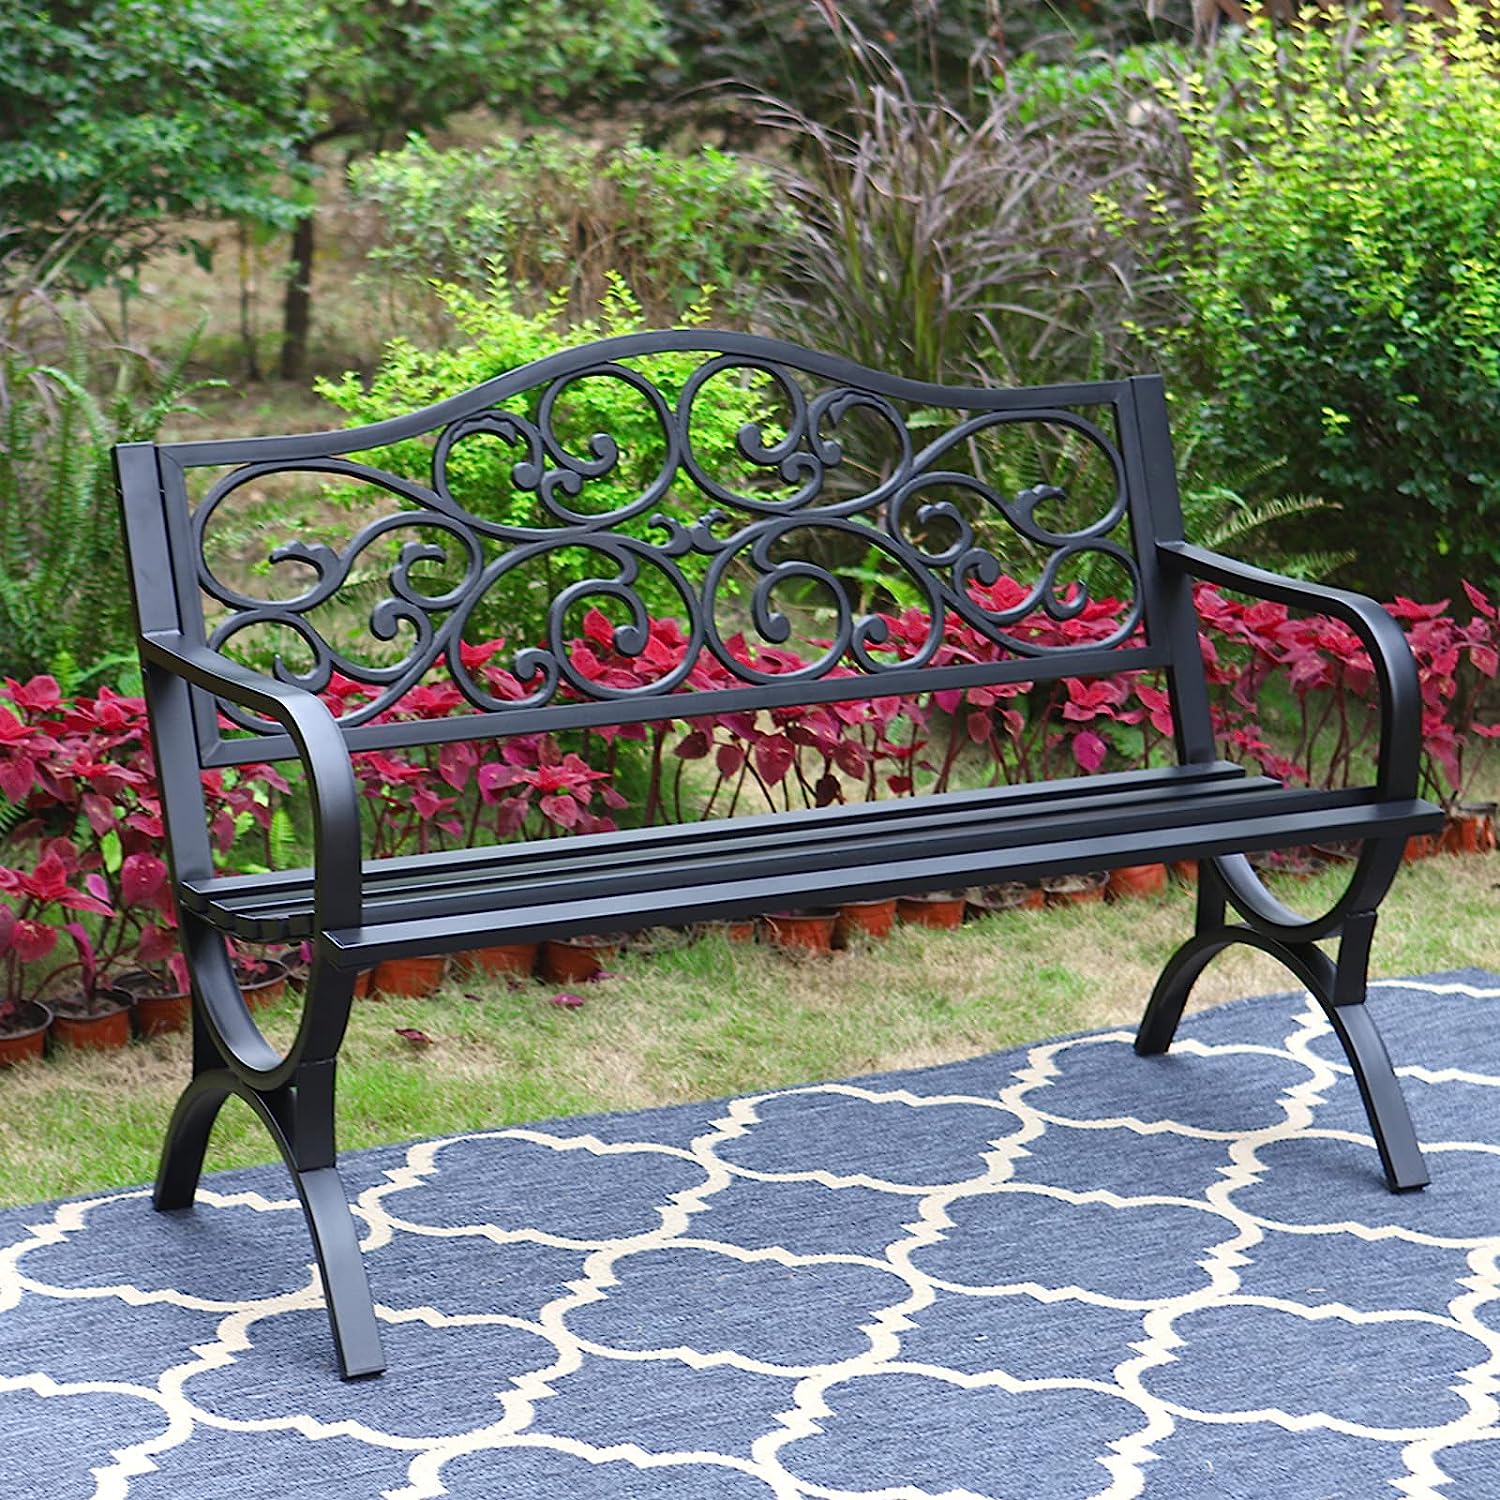 Classic cast iron garden bench on a geometric outdoor rug.